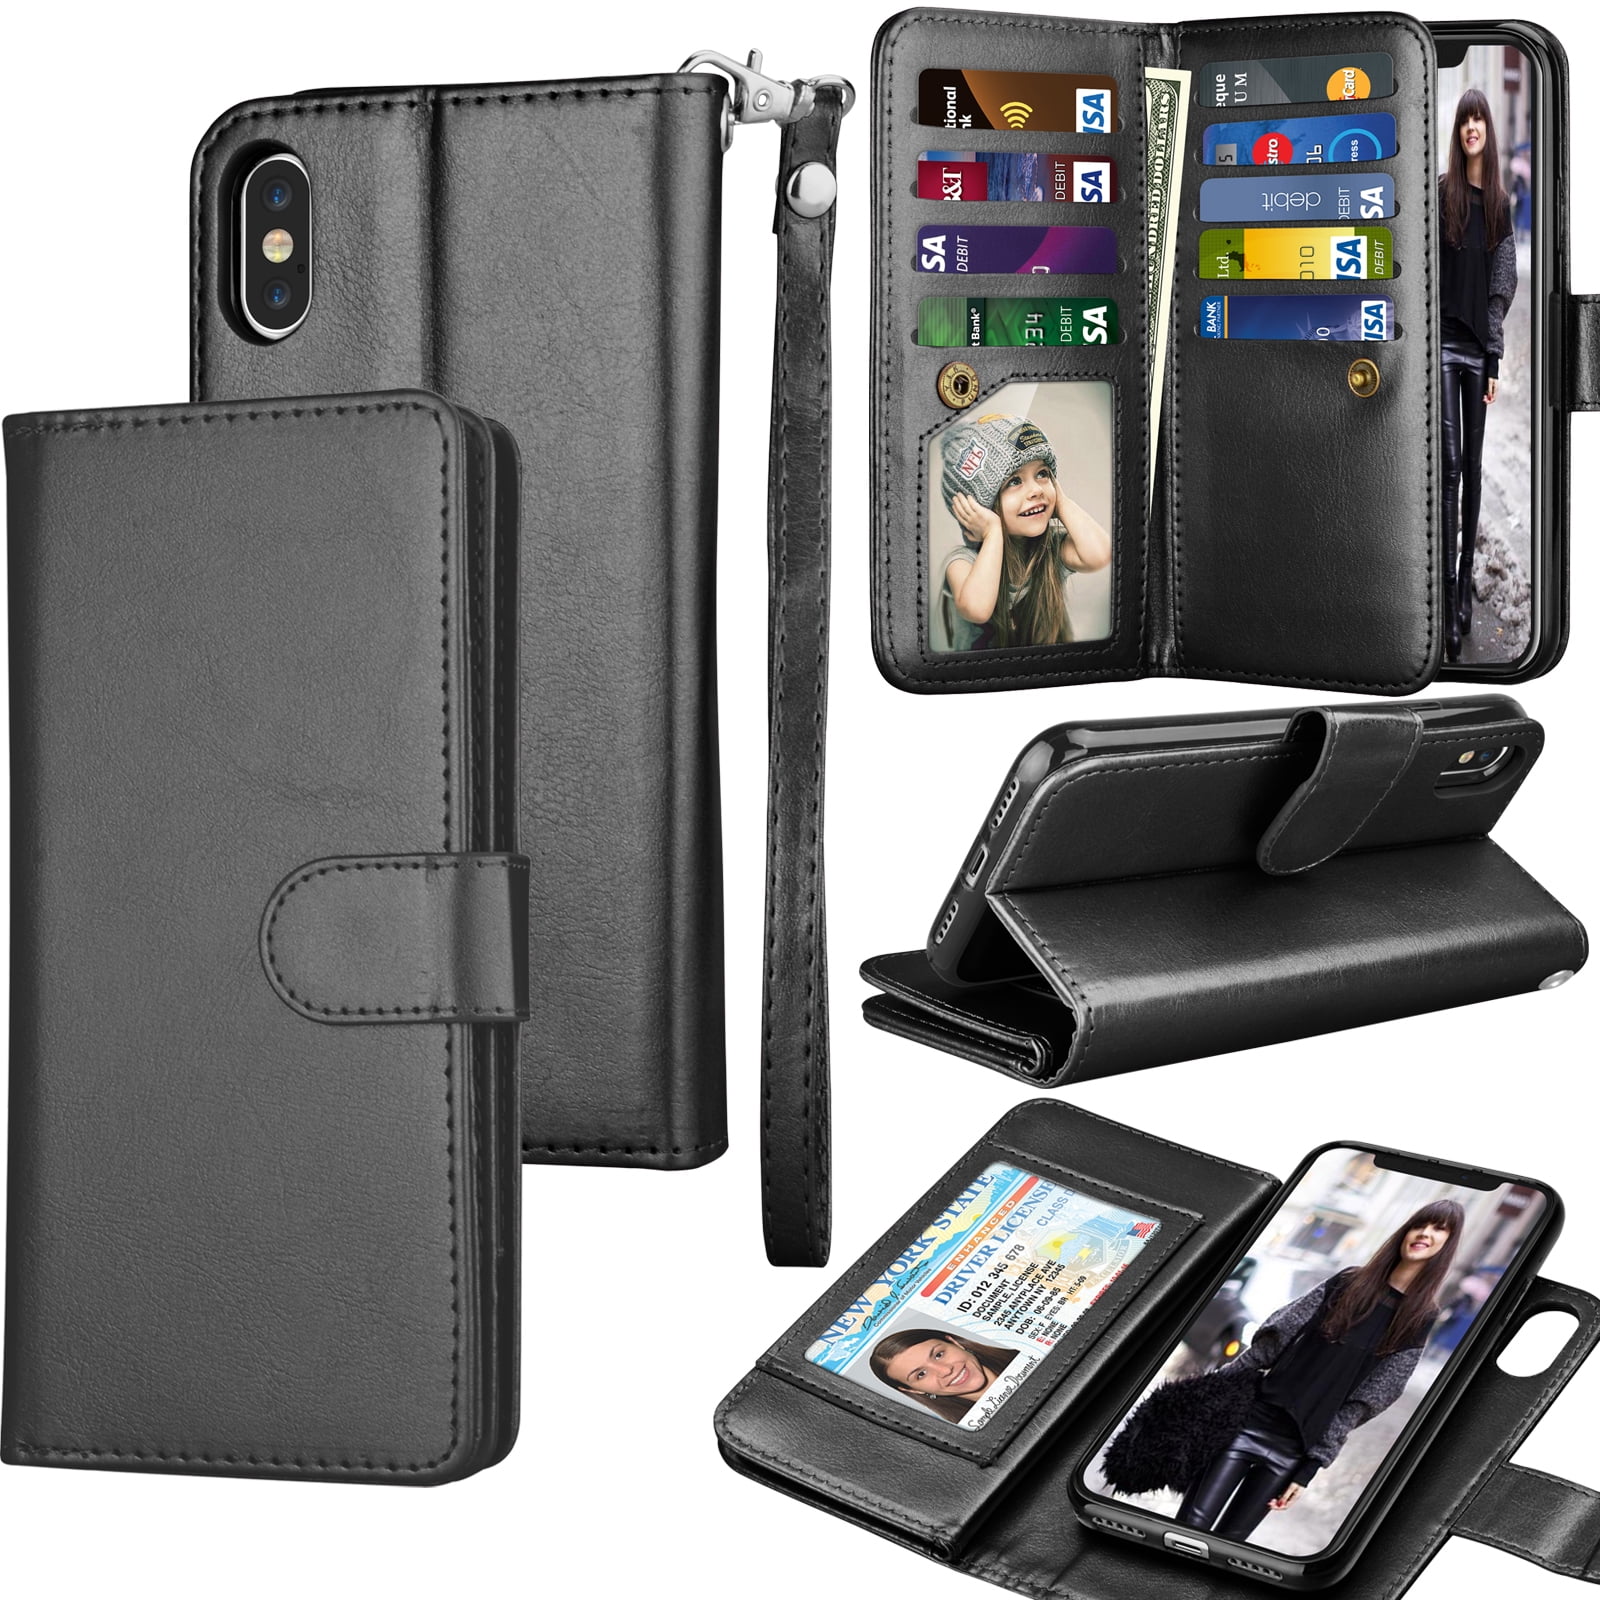 Cover for Leather Wallet Cover Card Holders Premium Business Kickstand Flip Cover iPhone Xs Flip Case 